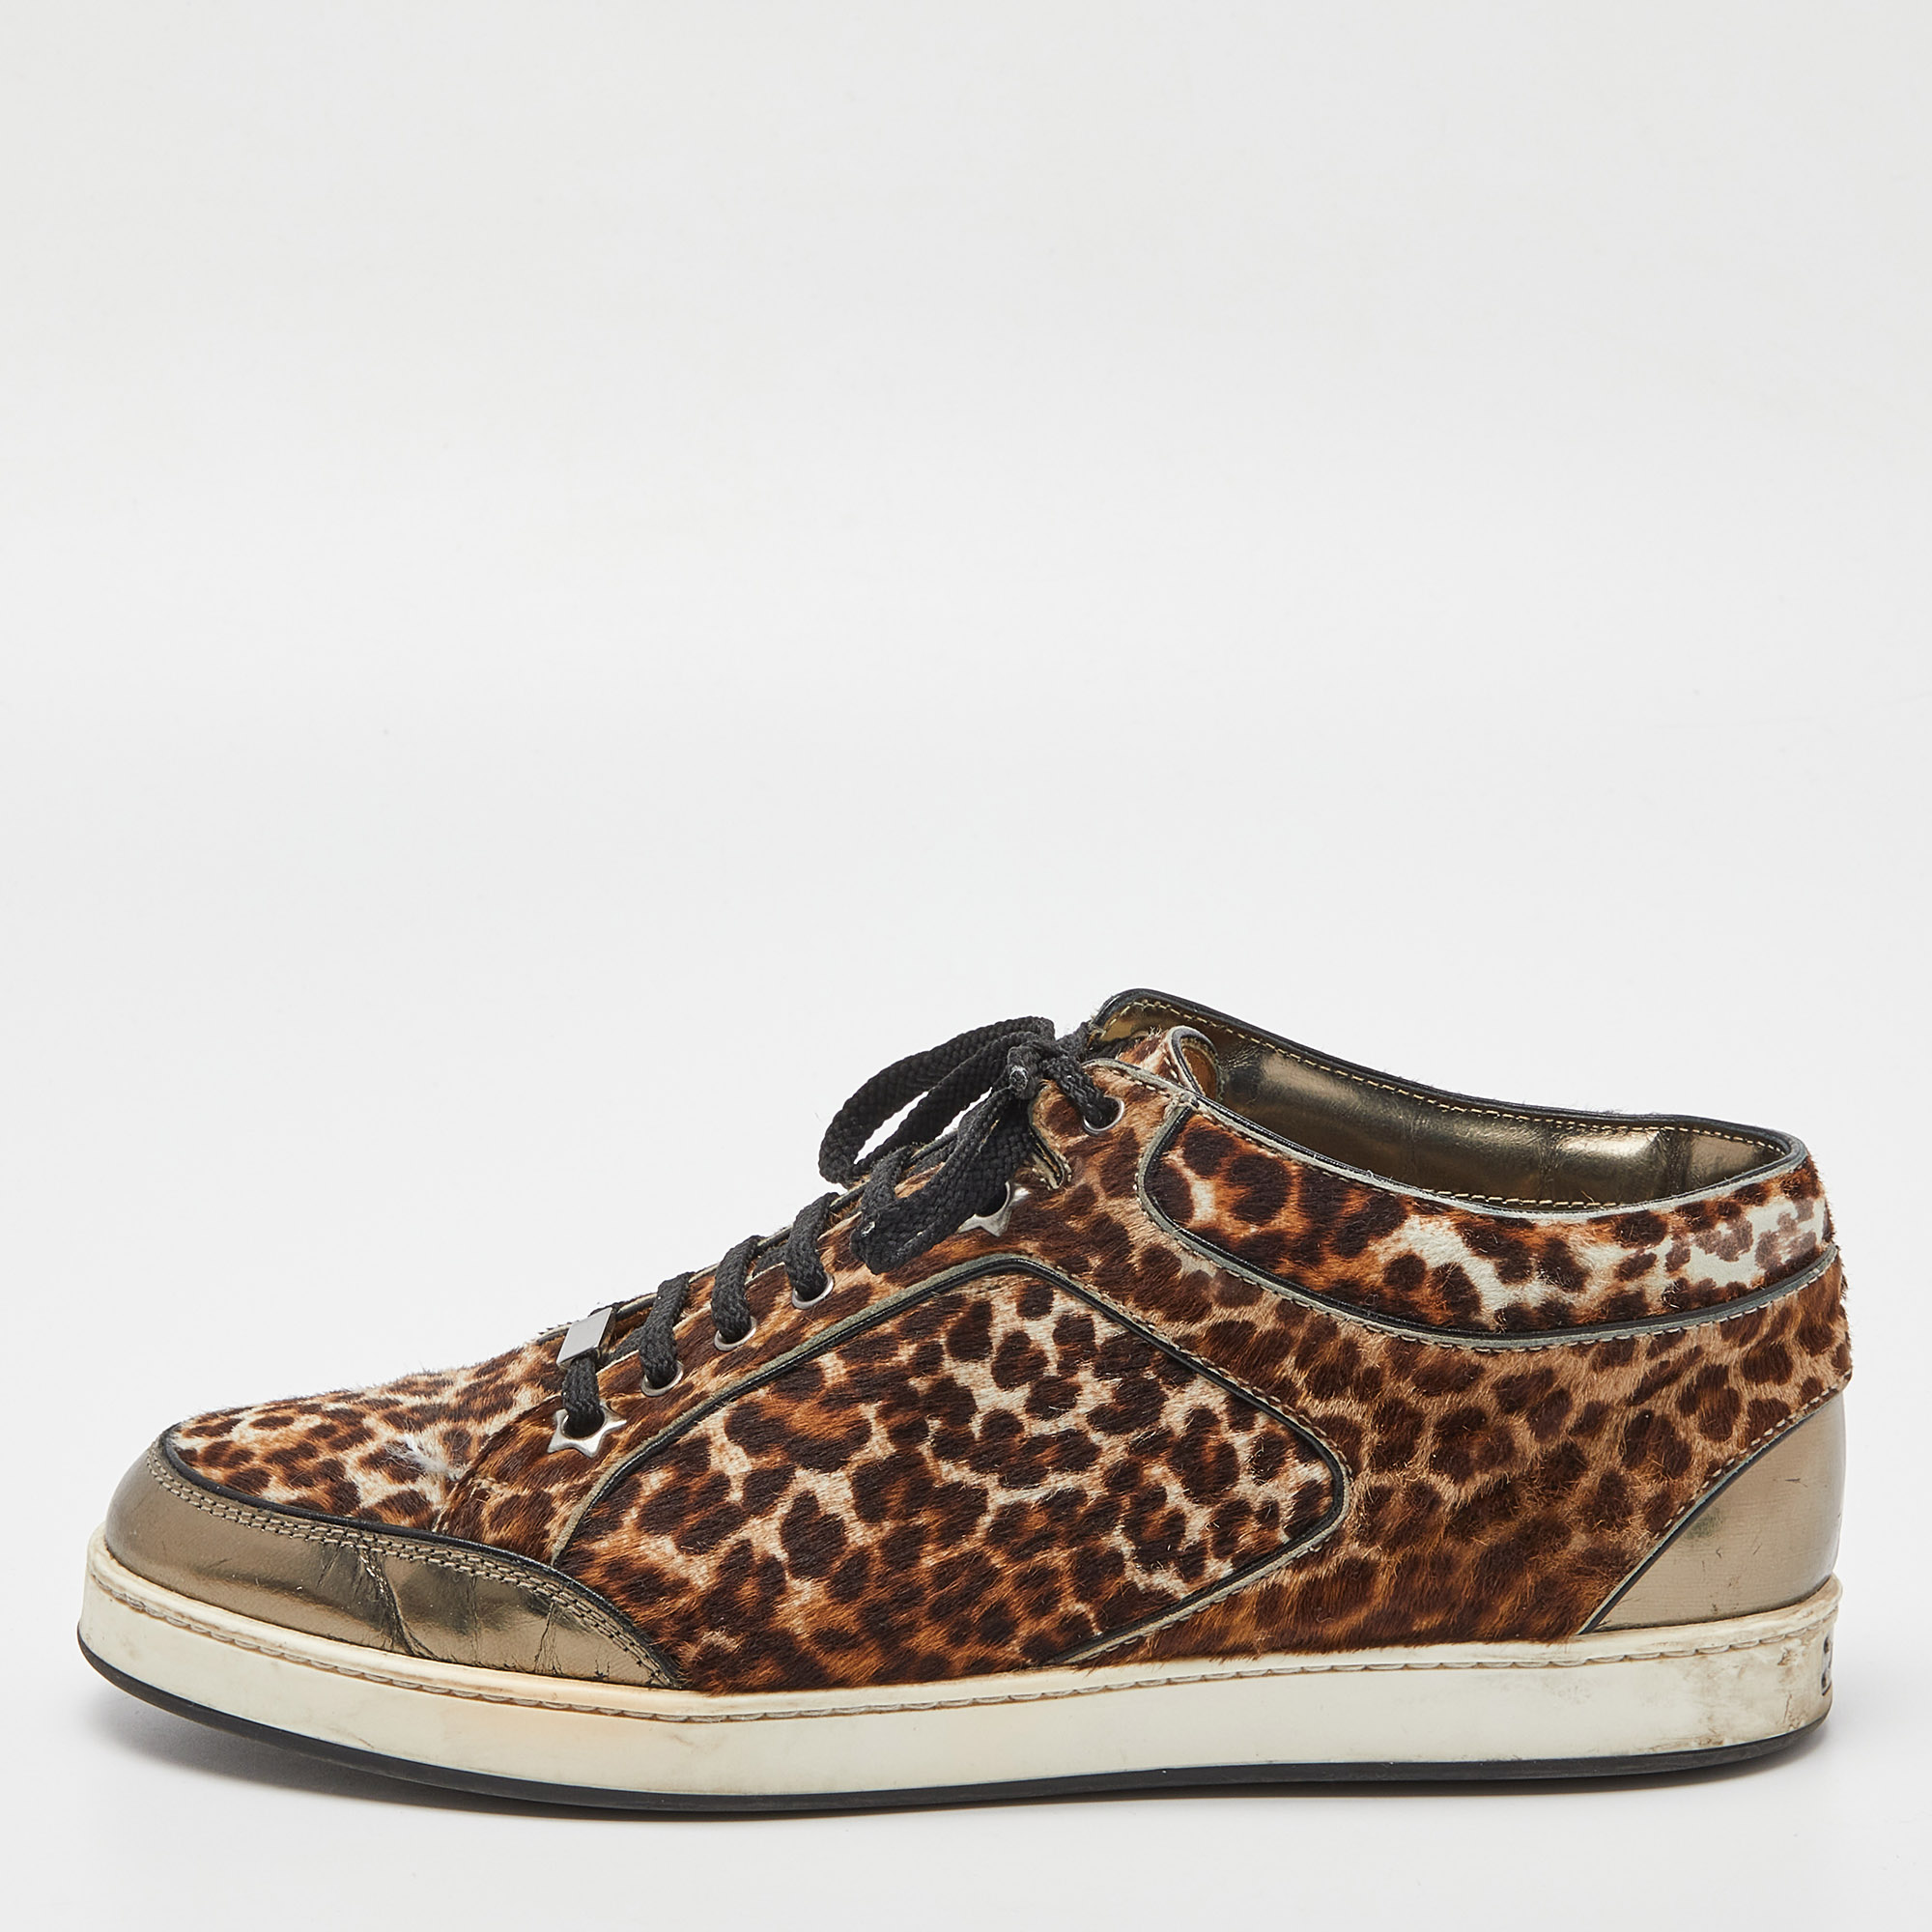 Pre-owned Jimmy Choo Brown/metallic Leopard Print Calfhair And Mirrored Leather Miami Low Top Sneakers Size 38.5